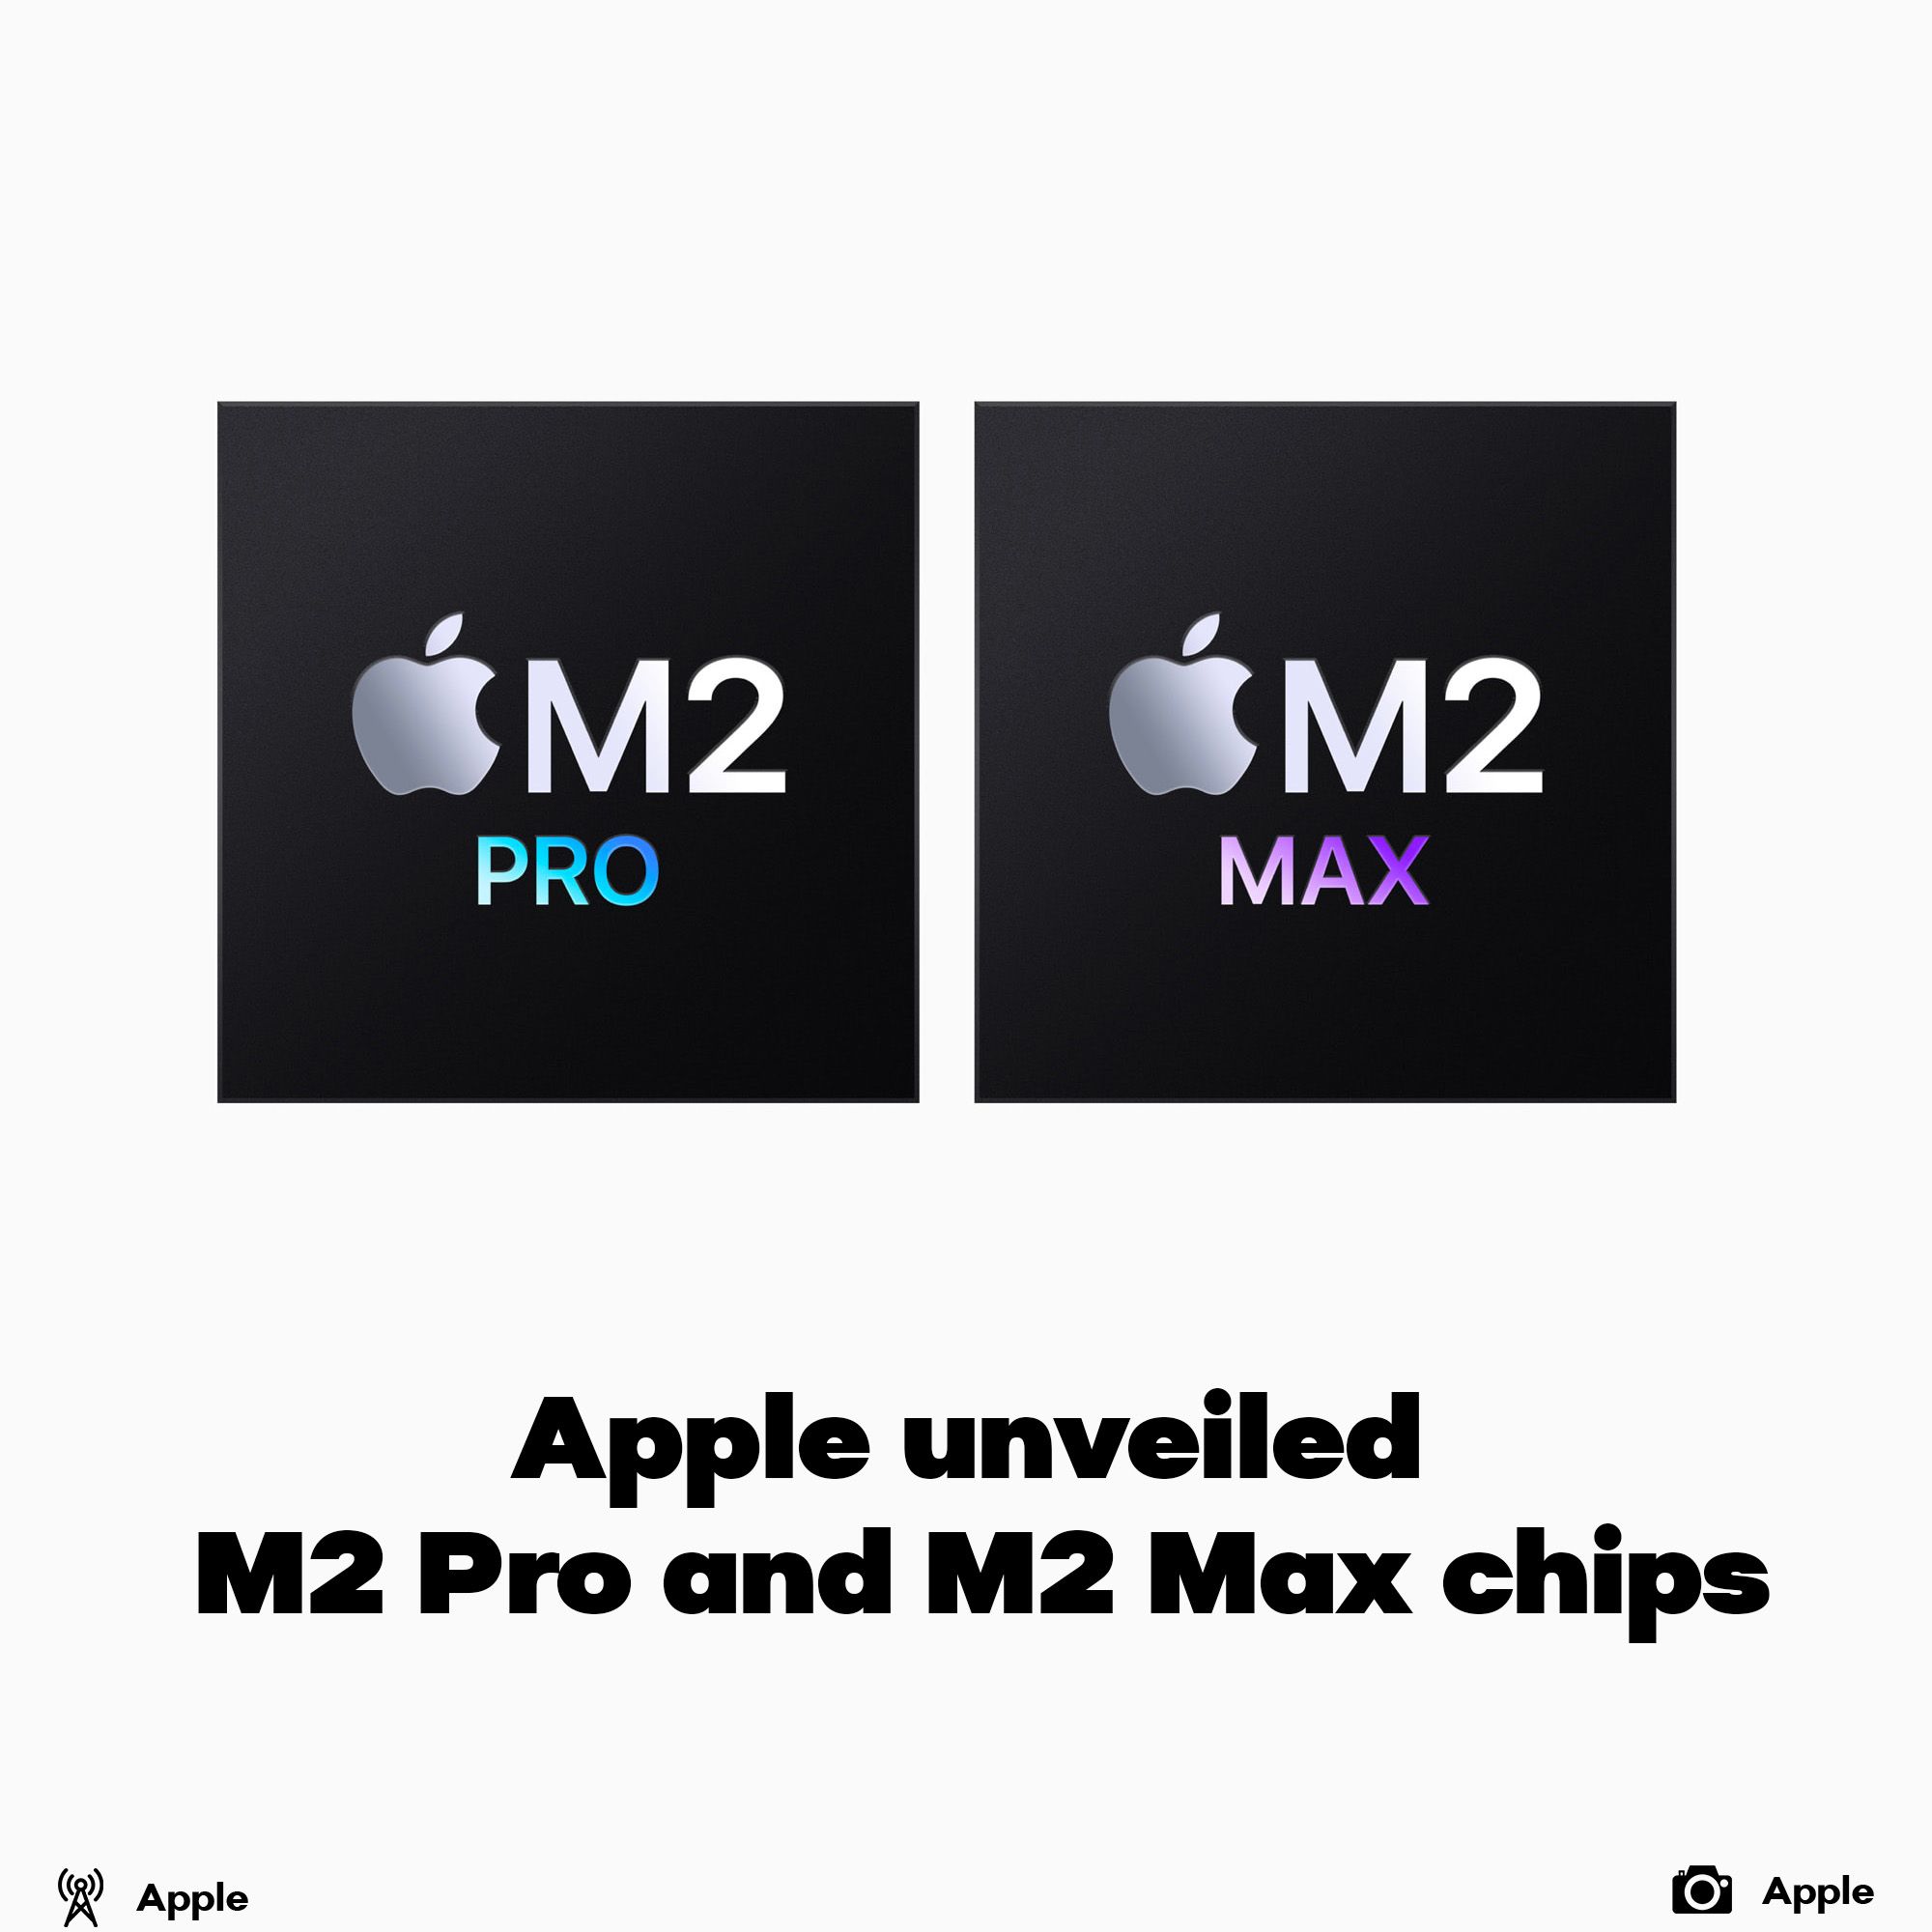 Apple unveiled M2 Pro & M2 Max chips